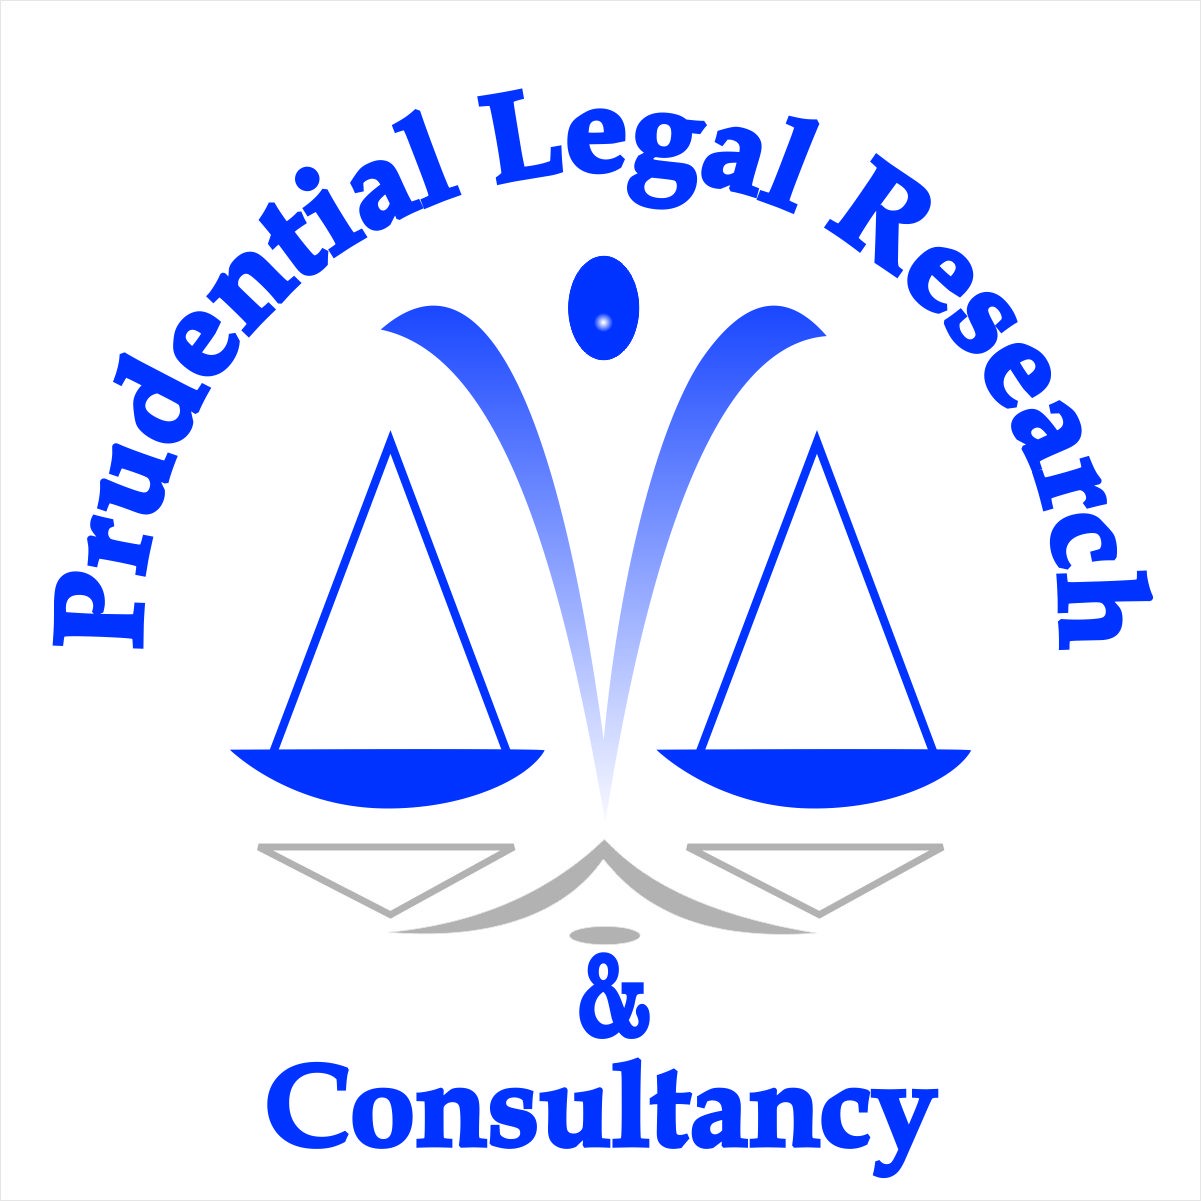 research consultancy jobs in nepal